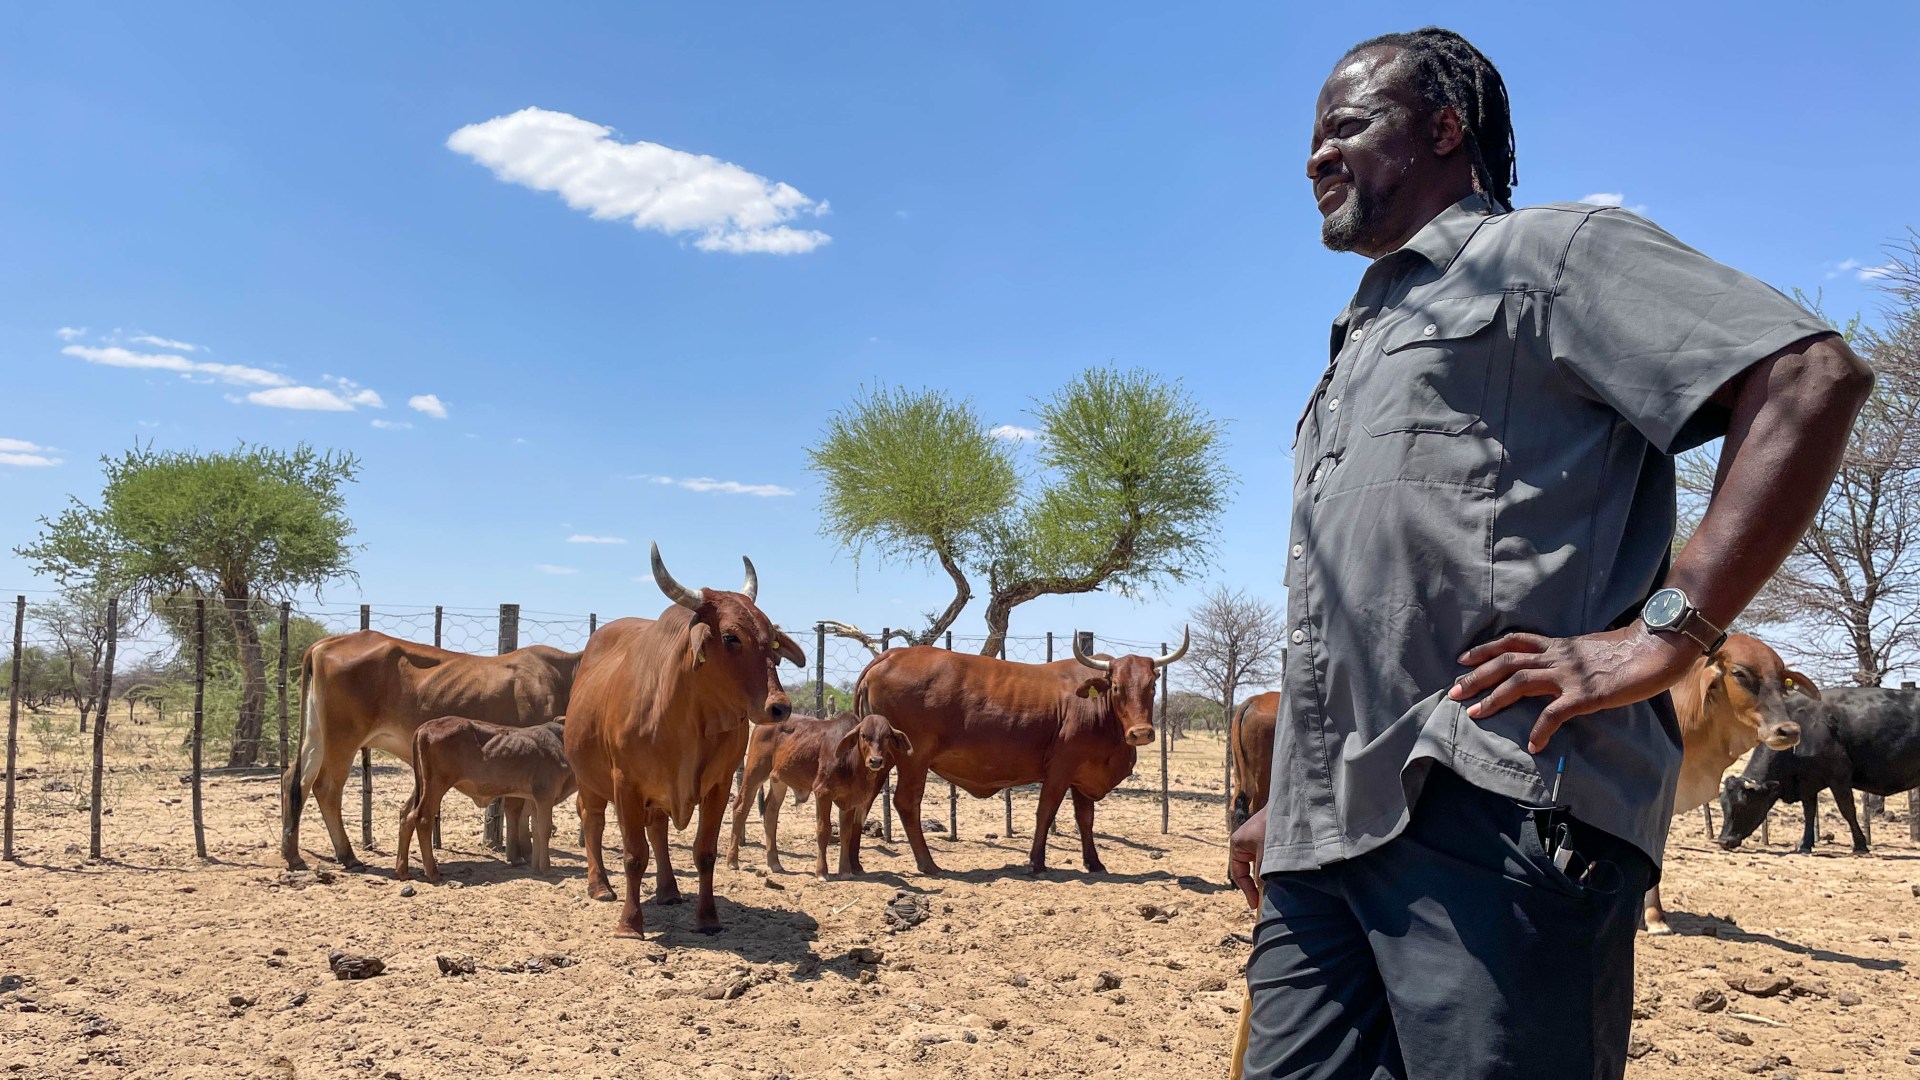 A man in a village in Namibia, with cows in the background